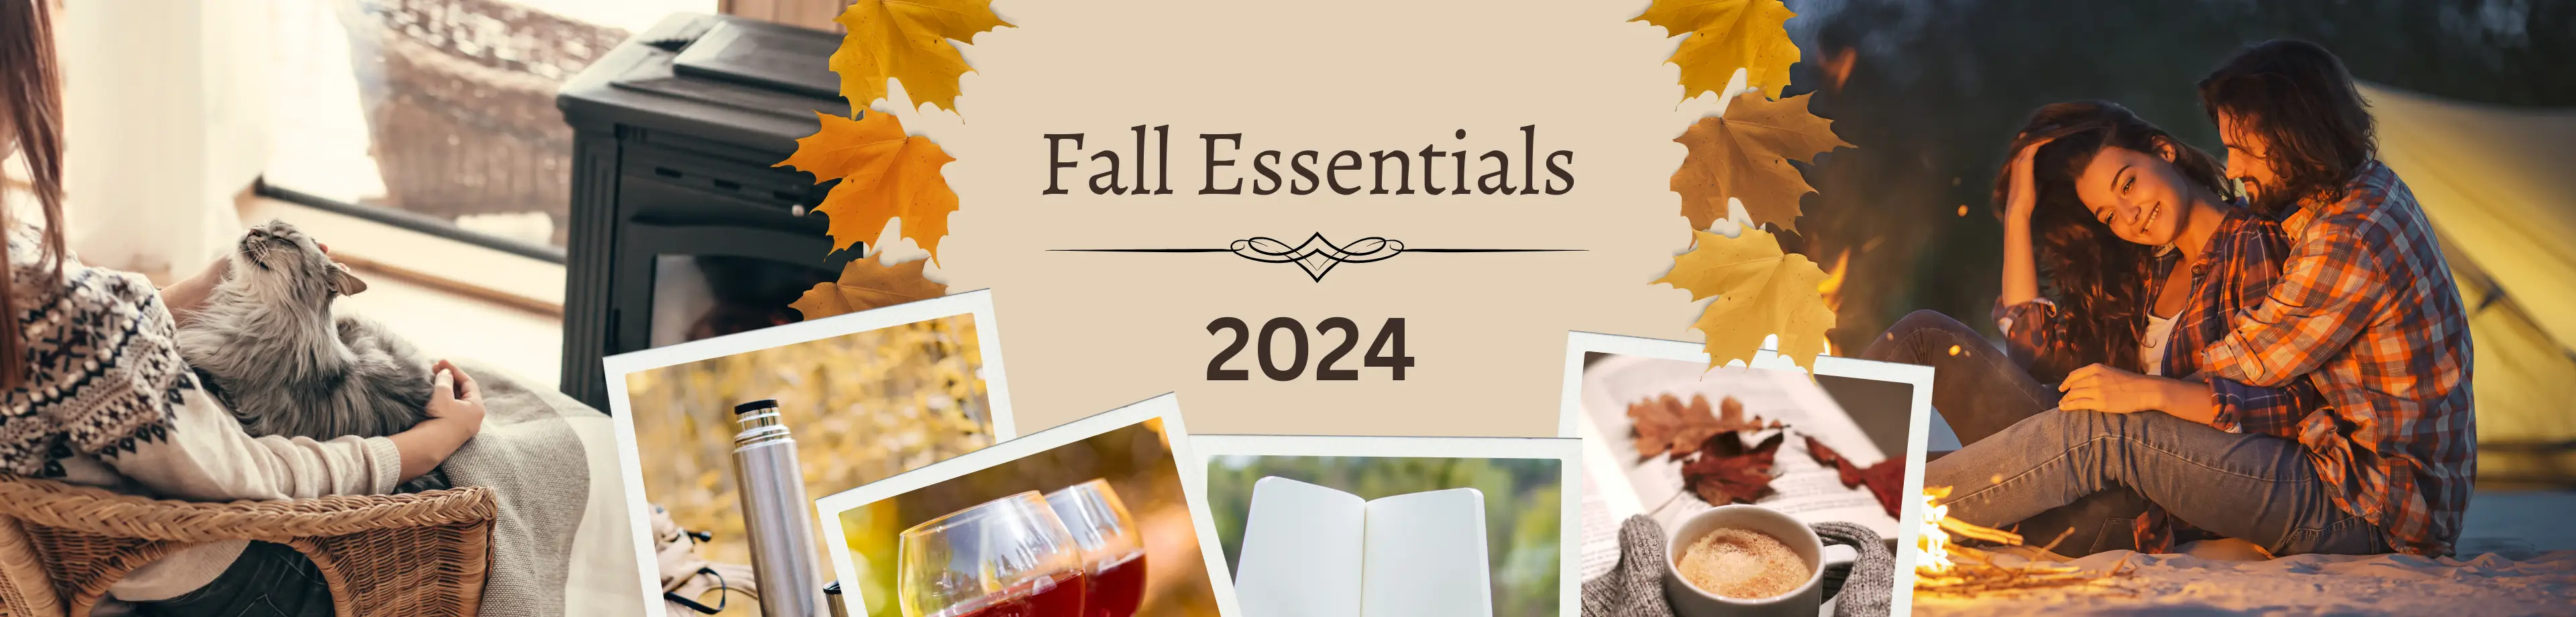 Fall Essentials 2024 - Make the most of the Canadian Fall with cozy brand awareness & business gifts!